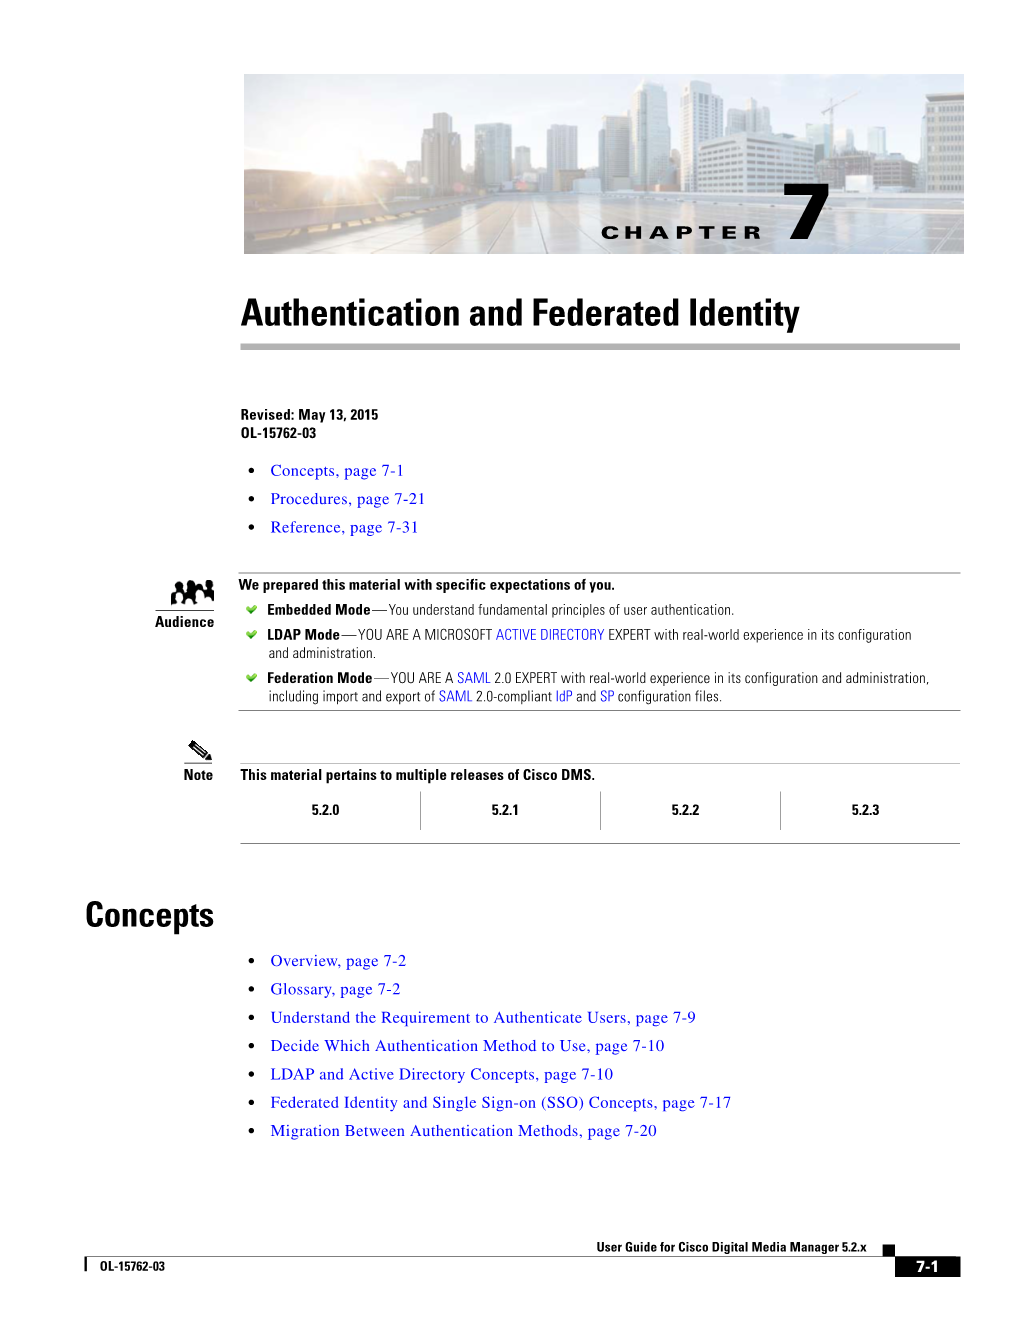 Authentication and Federated Identity